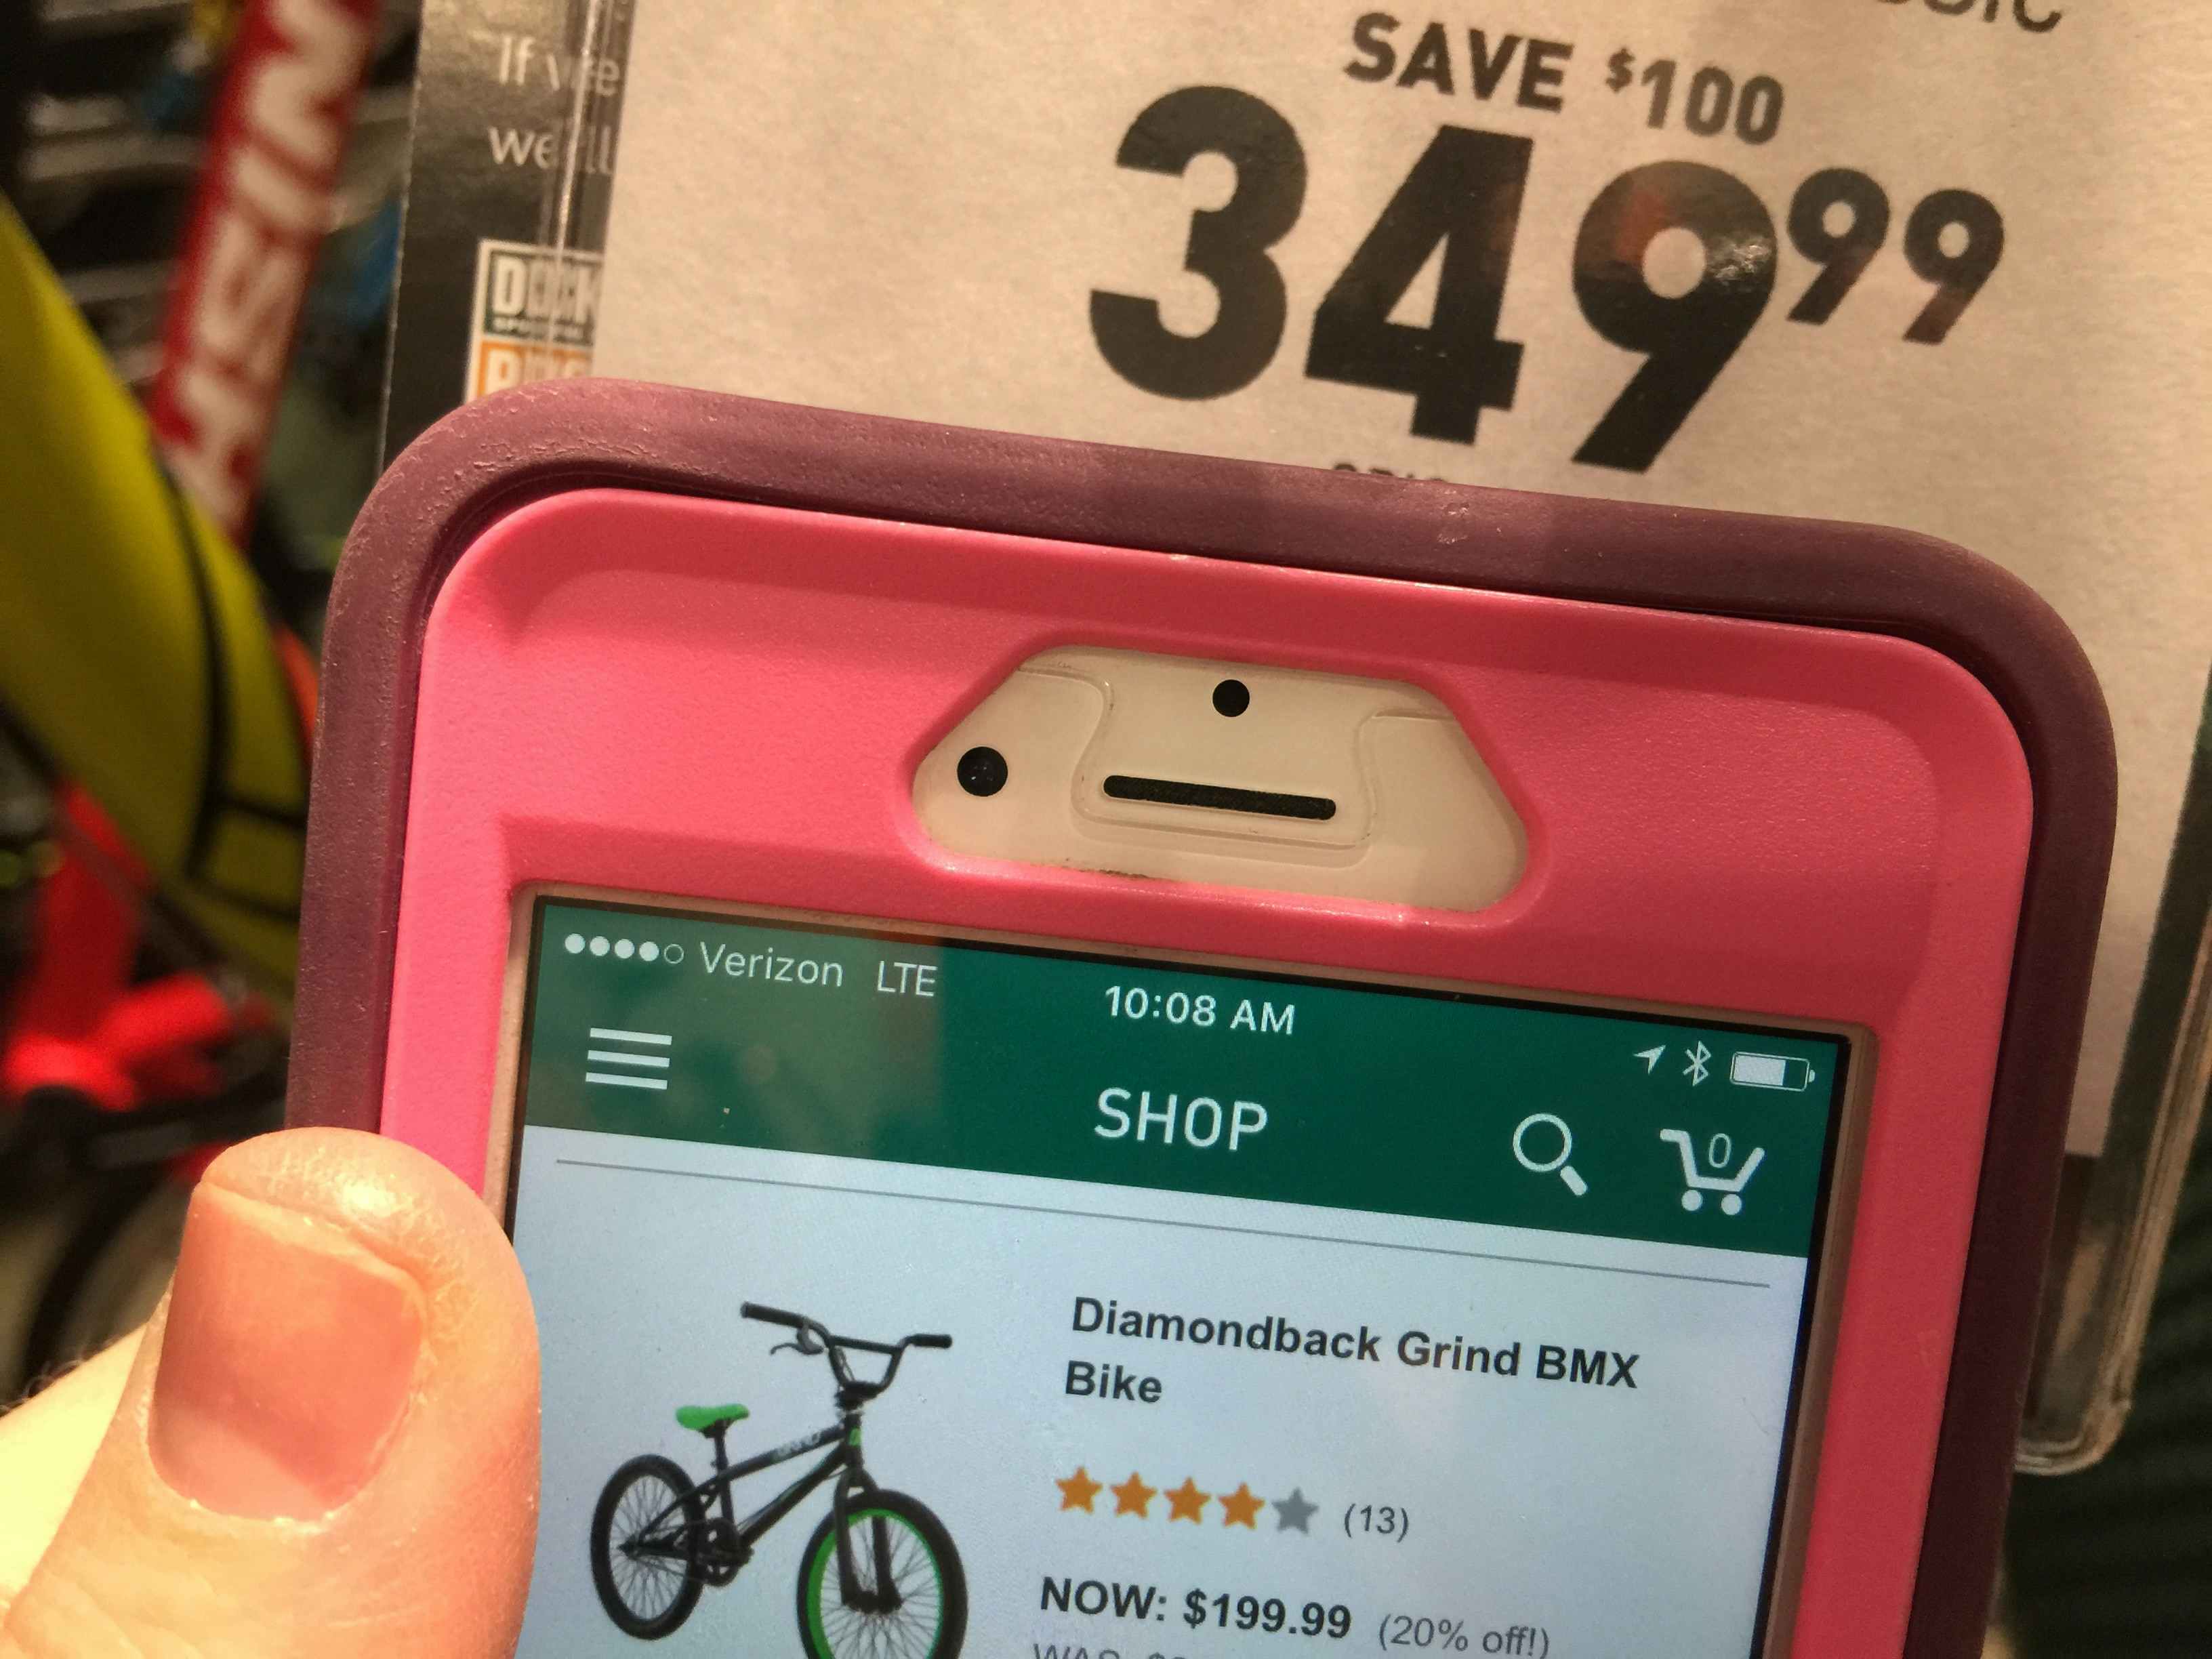 A close up of a price tag on a bike with a lower price pulled up on the Dick's app for the same item.